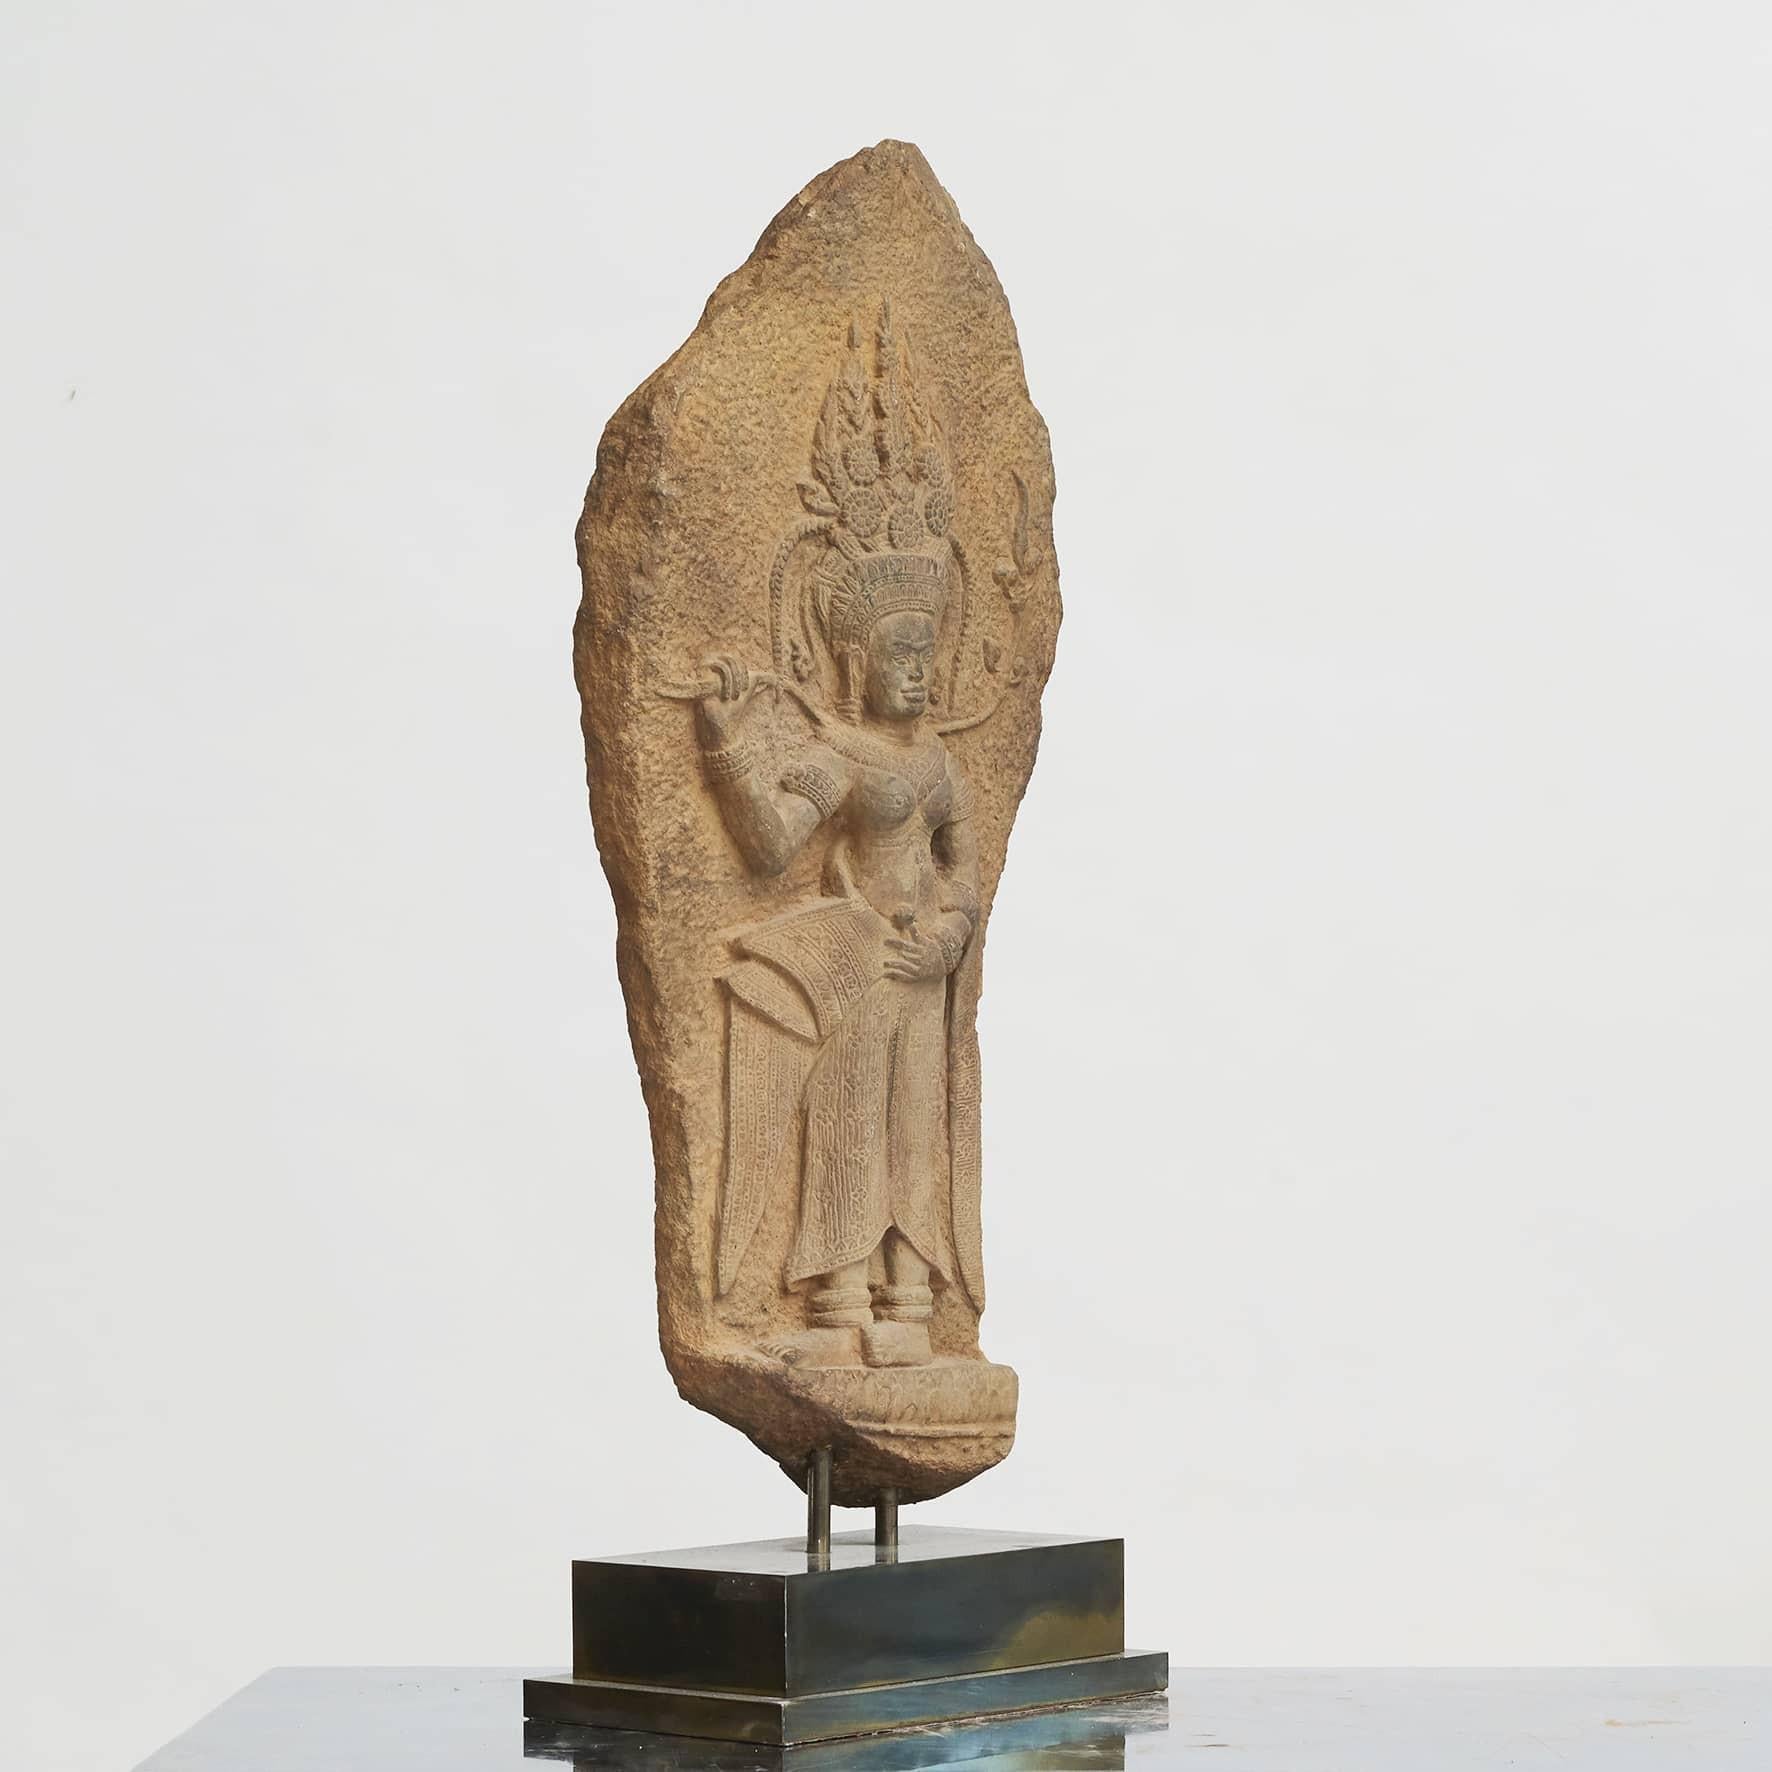 A sandstone carving of female spirit Apsara 'Dancer'. Mounted on custom dark polished brass base. From Angkor Wat, Cambodia.
Bought by the previous owner in 2011. Included was a certificate documenting that the relief is from from the 11th or 12th